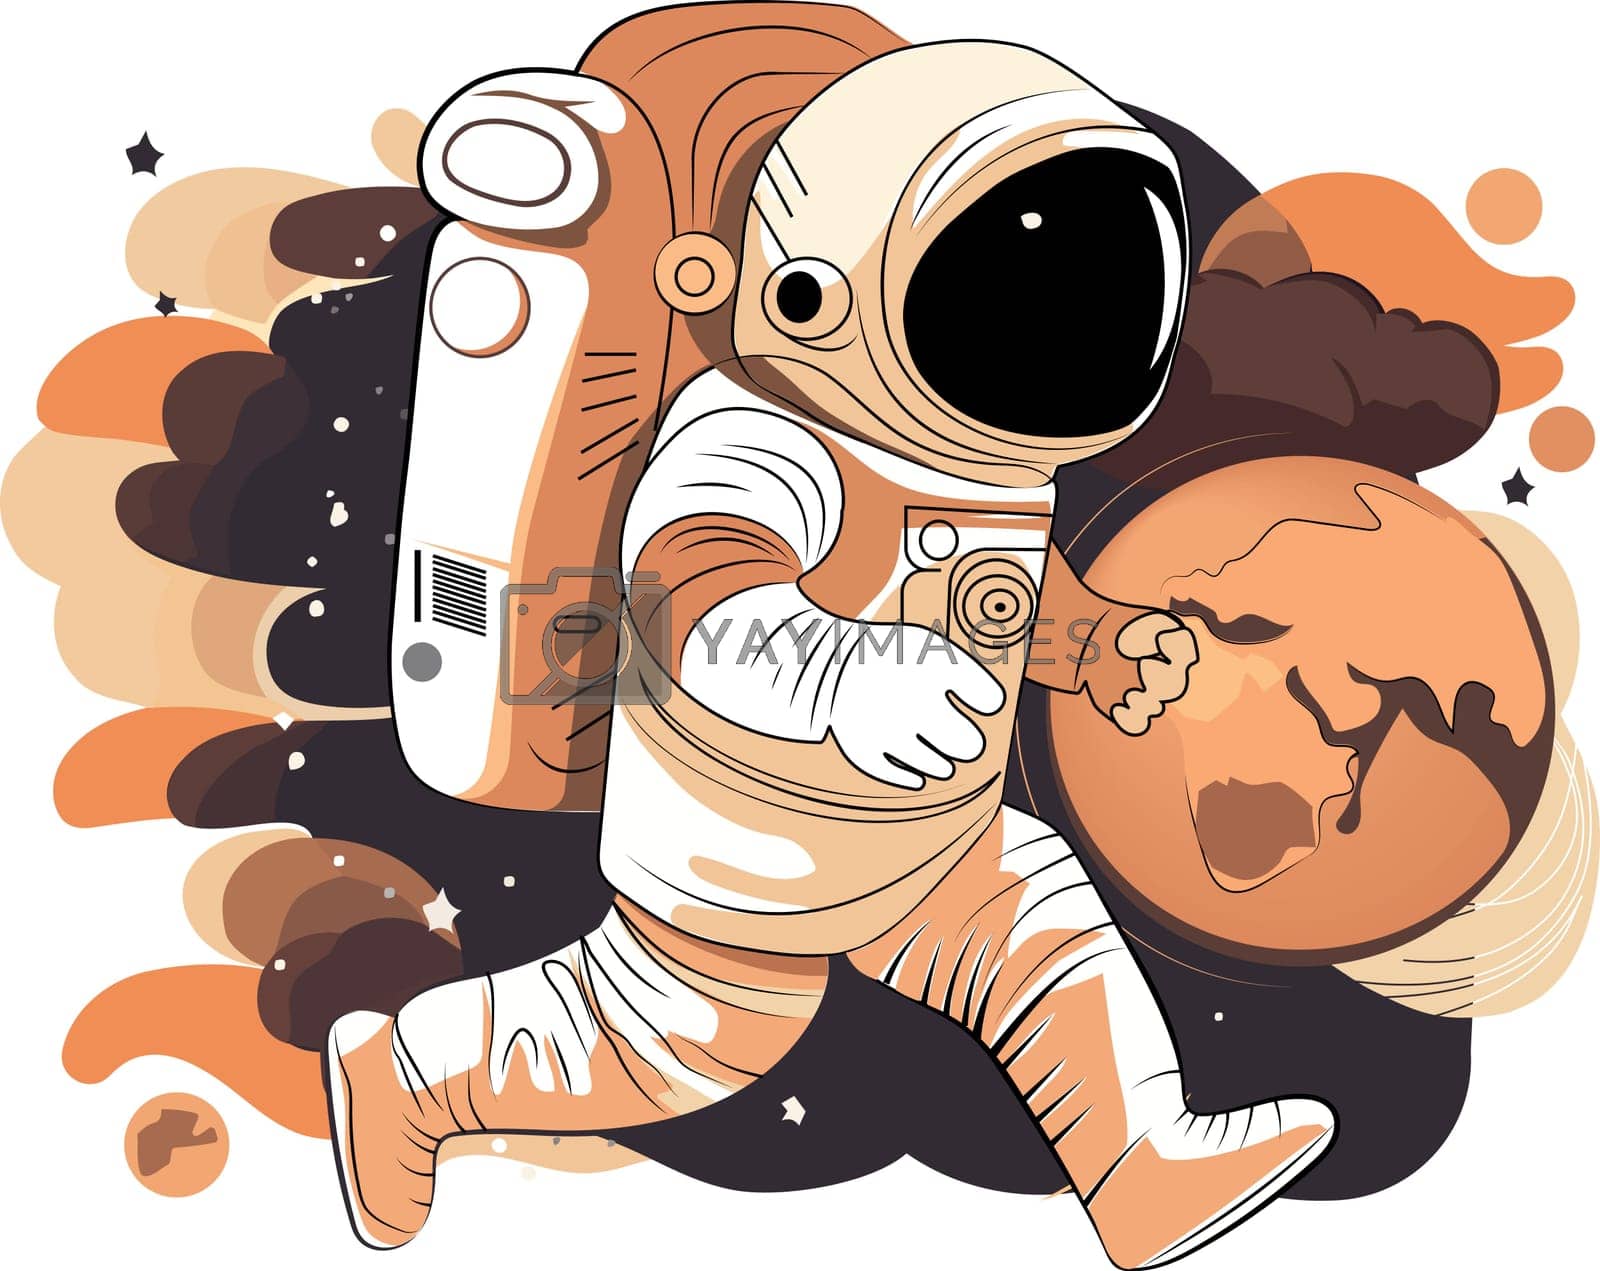 Royalty free image of Astronaut explores space being desert planet by milastokerpro